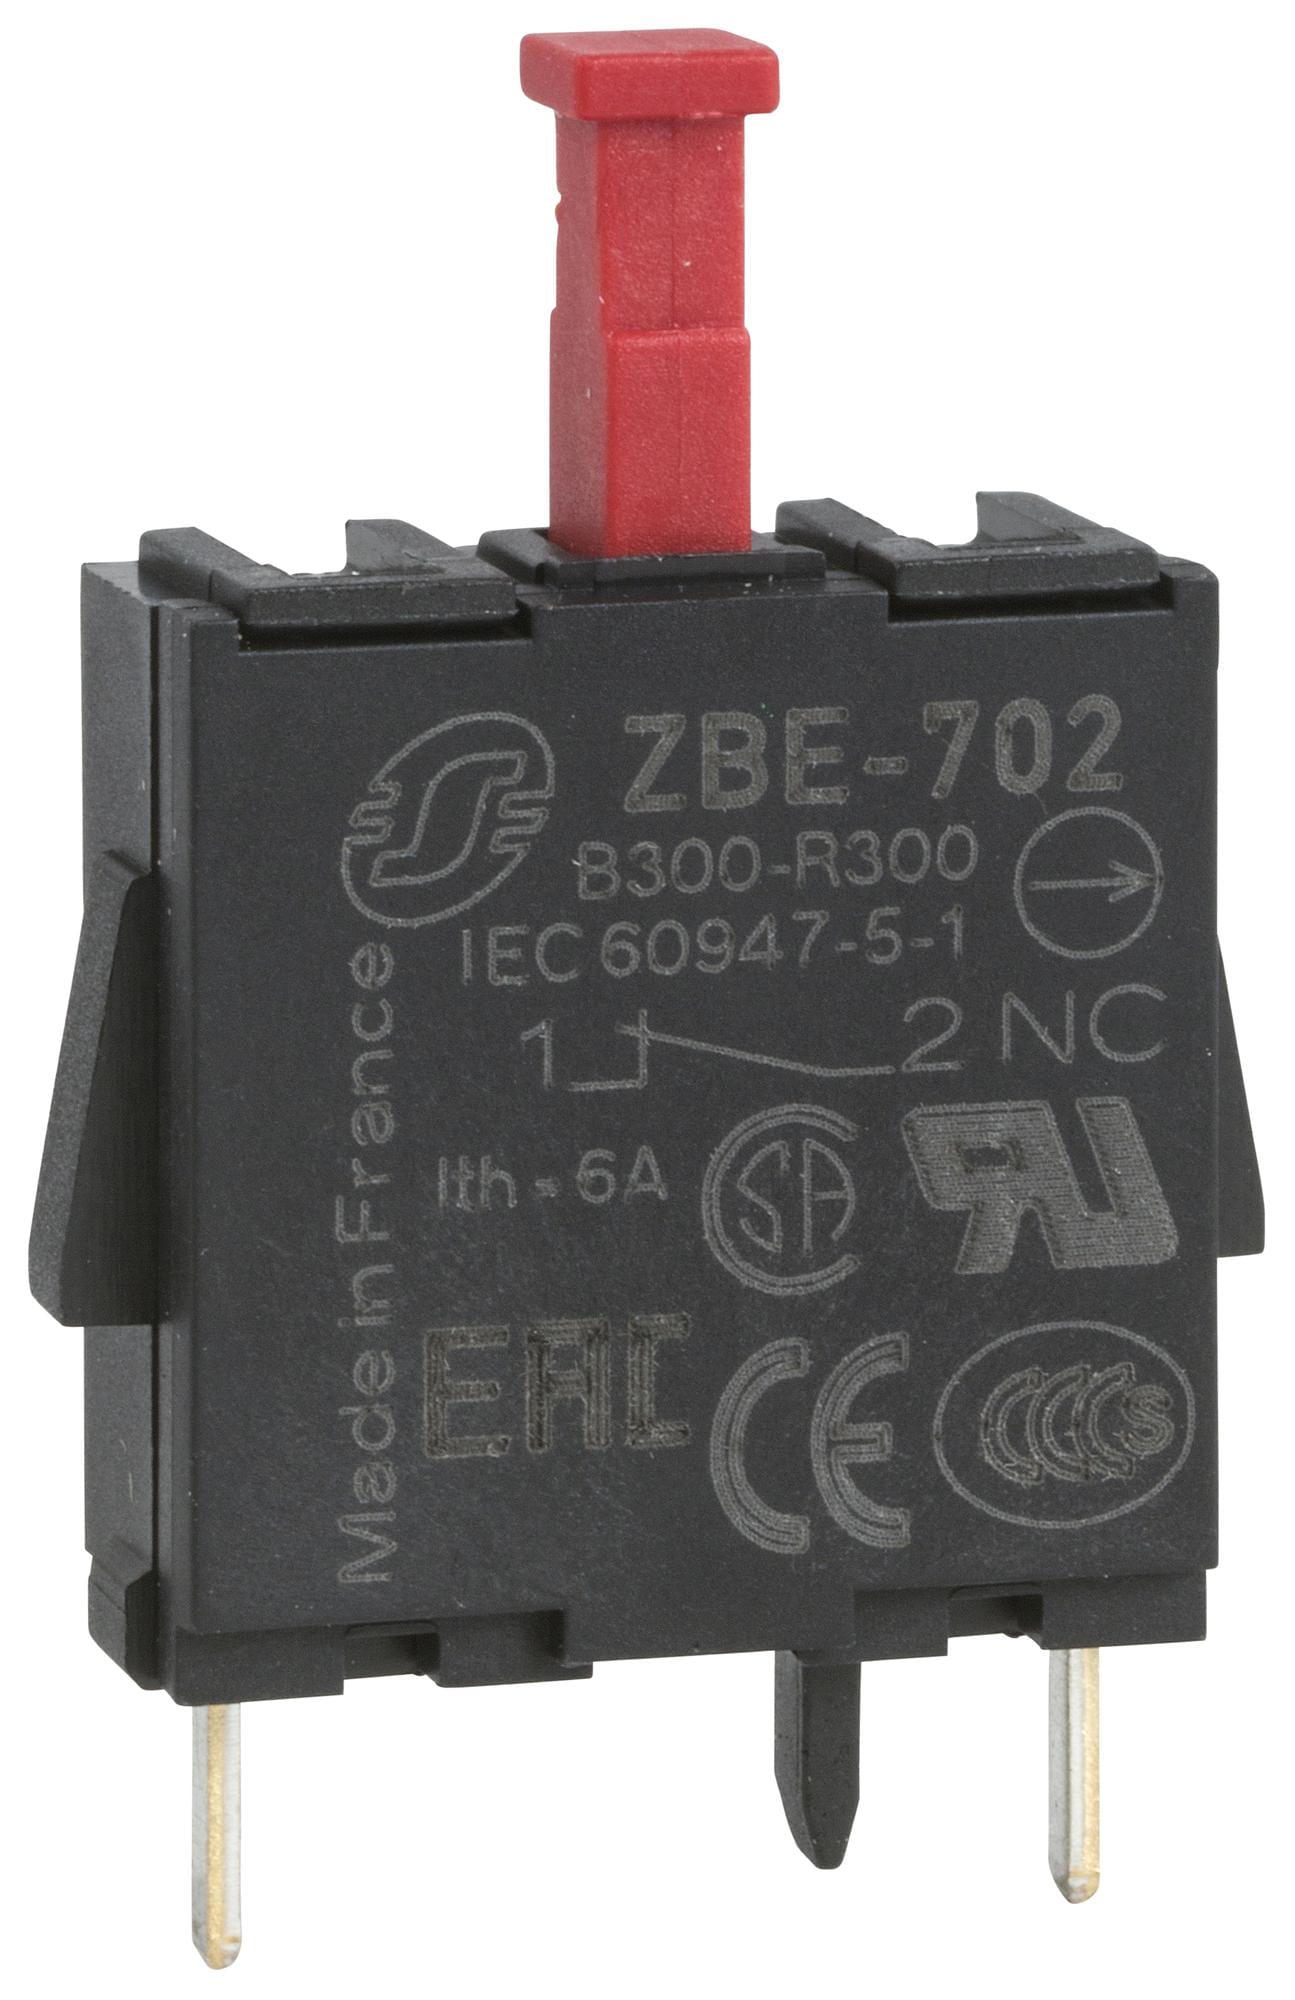 SCHNEIDER ELECTRIC Contact Blocks ZBE702 CONTACT BLOCK, 3A, 120VAC, TH SCHNEIDER ELECTRIC 3215216 ZBE702